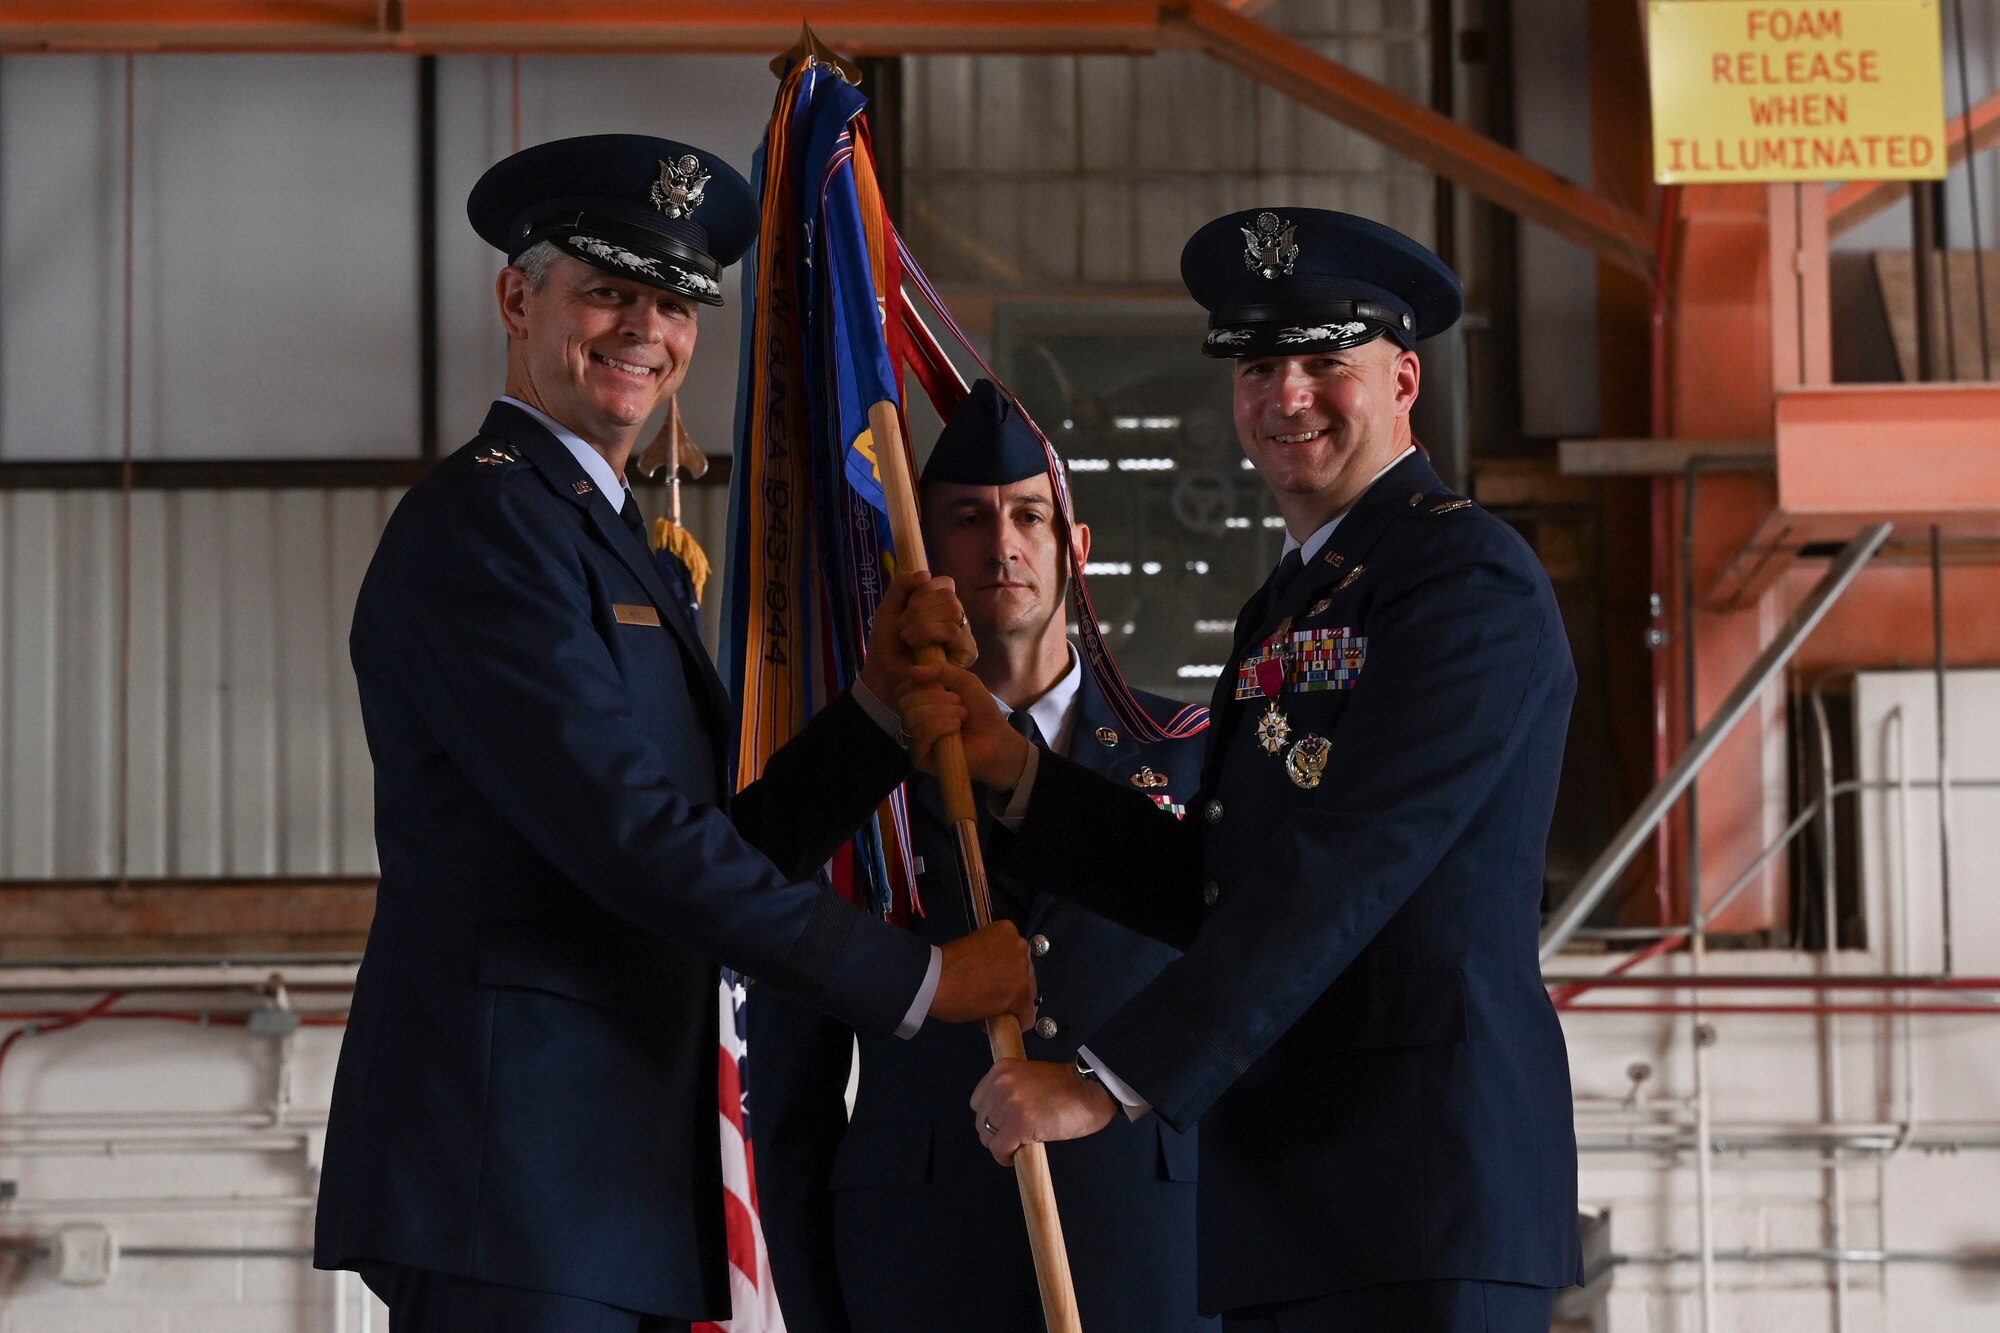 Col. Ryan P. Keeney relinquishes command of the 49th Wing to Maj. Gen. Craig D. Wills, 19th Air Force commander, during a change of command ceremony, June 17, 2022, on Holloman Air Force Base, New Mexico. Keeney ended his tenure as commander after two years of leading the Fightin’ 49ers of the 49th Wing. (U.S. Air Force photo by Airman 1st Class Antonio Salfran)